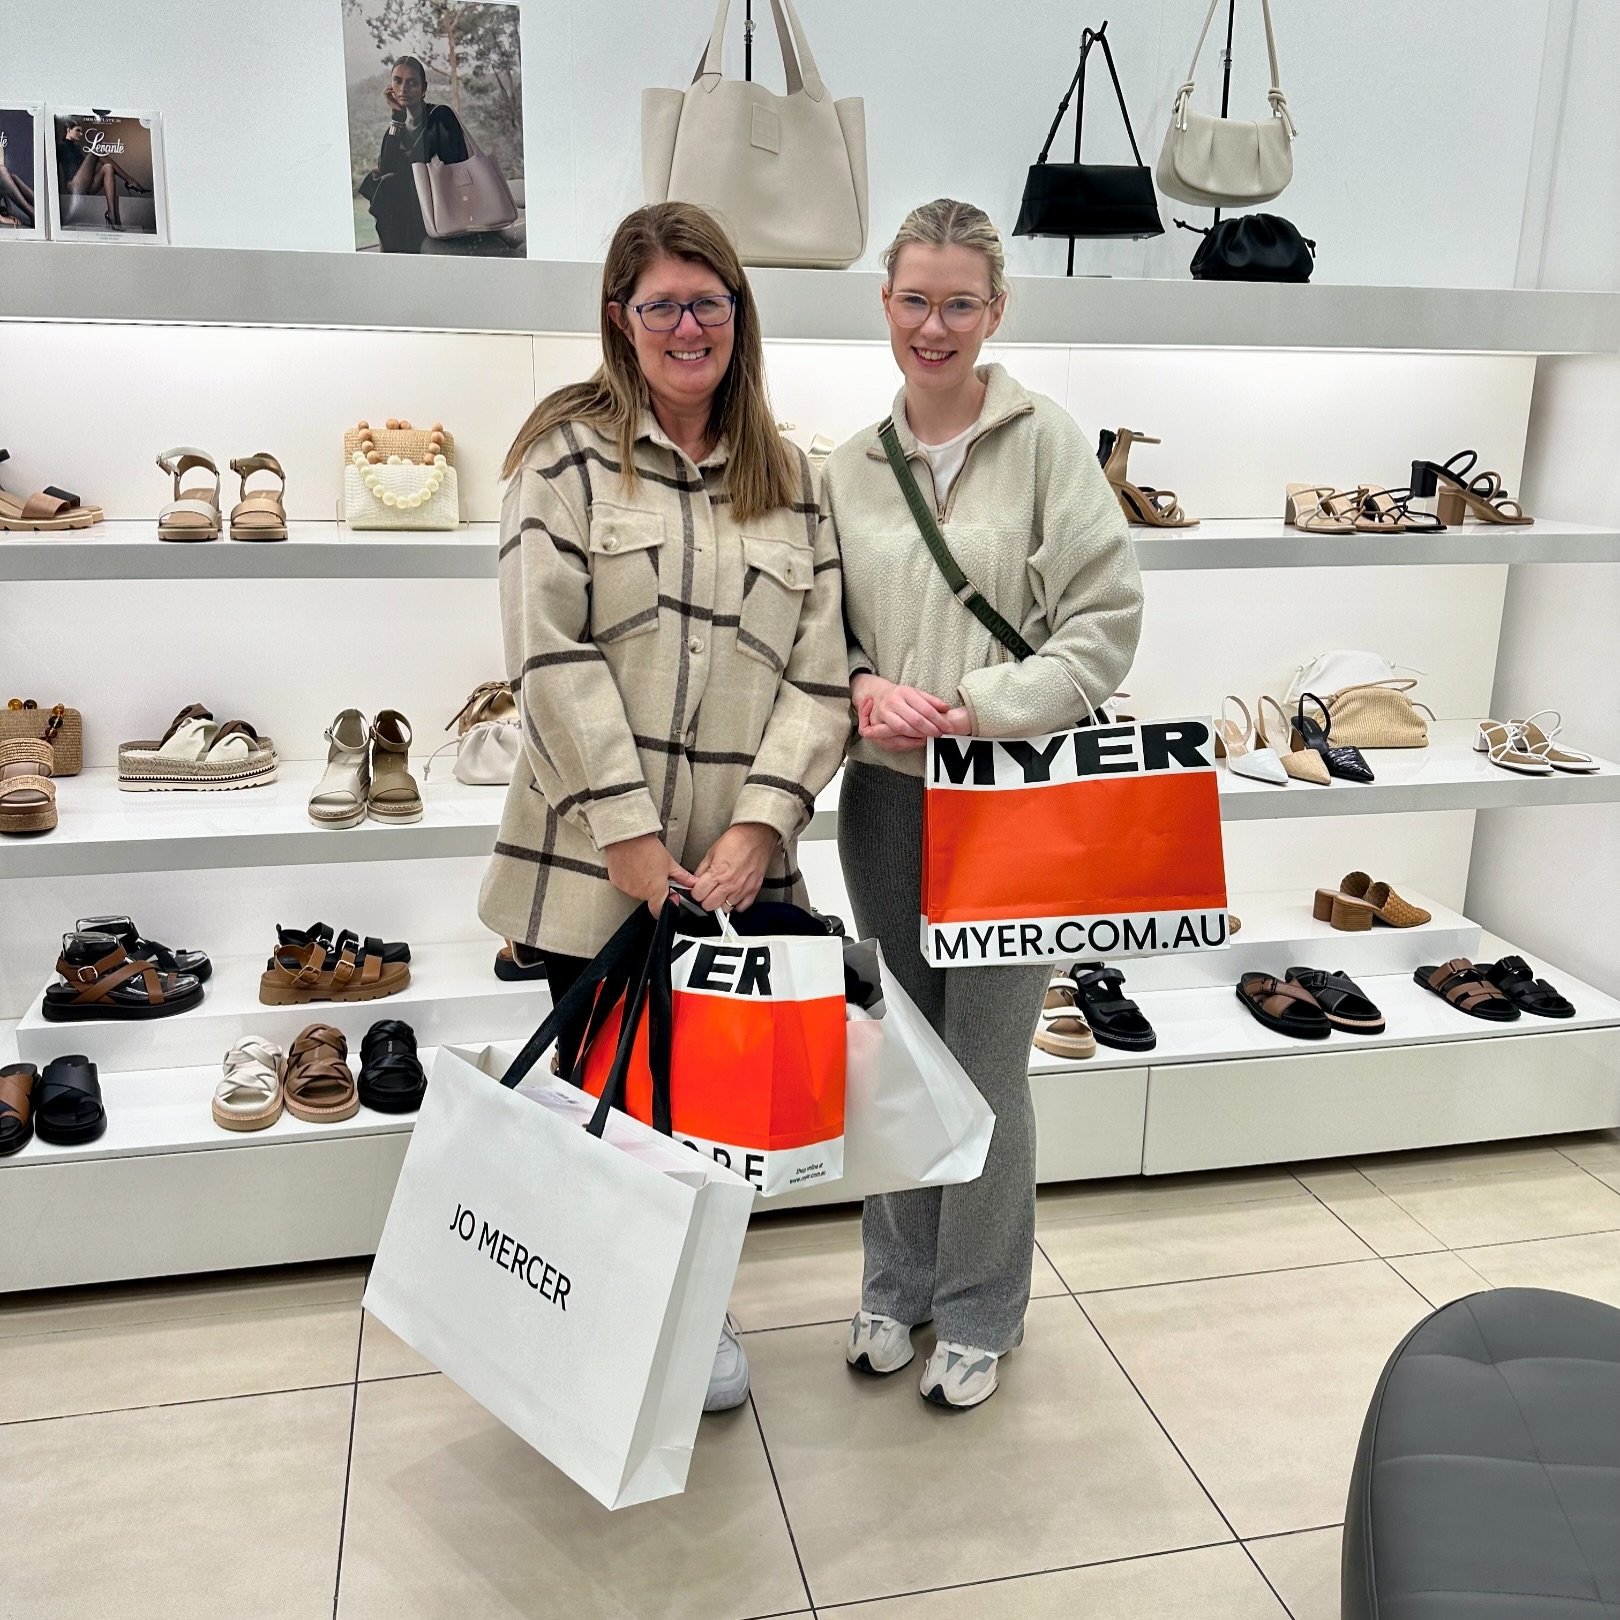 &bull; P E R S O N A L - S H O P P I N G &bull;
#westfieldstylist #personalshoppingservice #melbournestylist 

Today I had the absolute pleasure of meeting a beautiful Mother &amp; Daughter duo, for a 3 hour Personal Shopping service at Westfield Fou